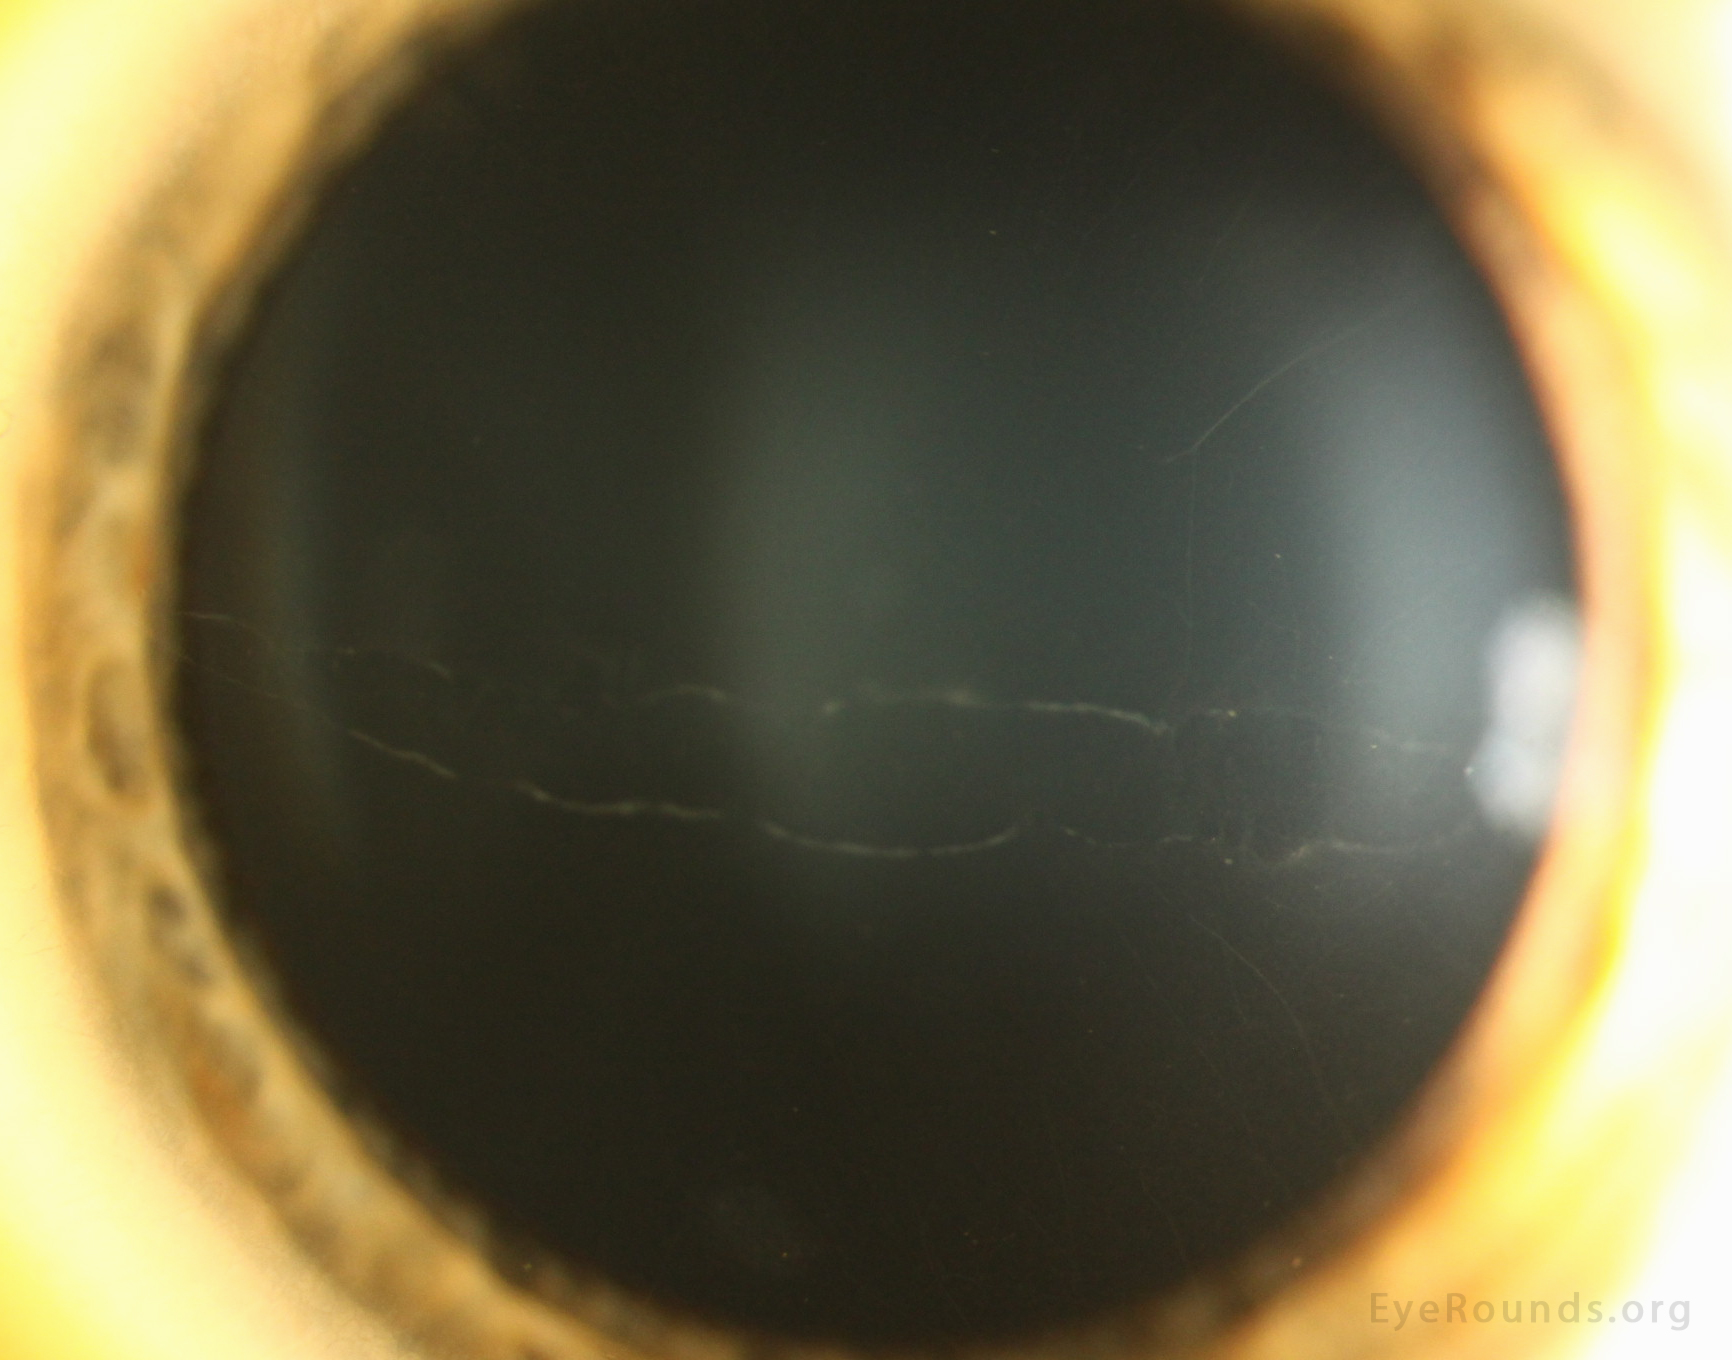 patient 2a Band lesions, sometimes called 'snail tracks,' are classically horizontal lesions with parallel, scalloped, non-tapering edges at the level of the posterior cornea